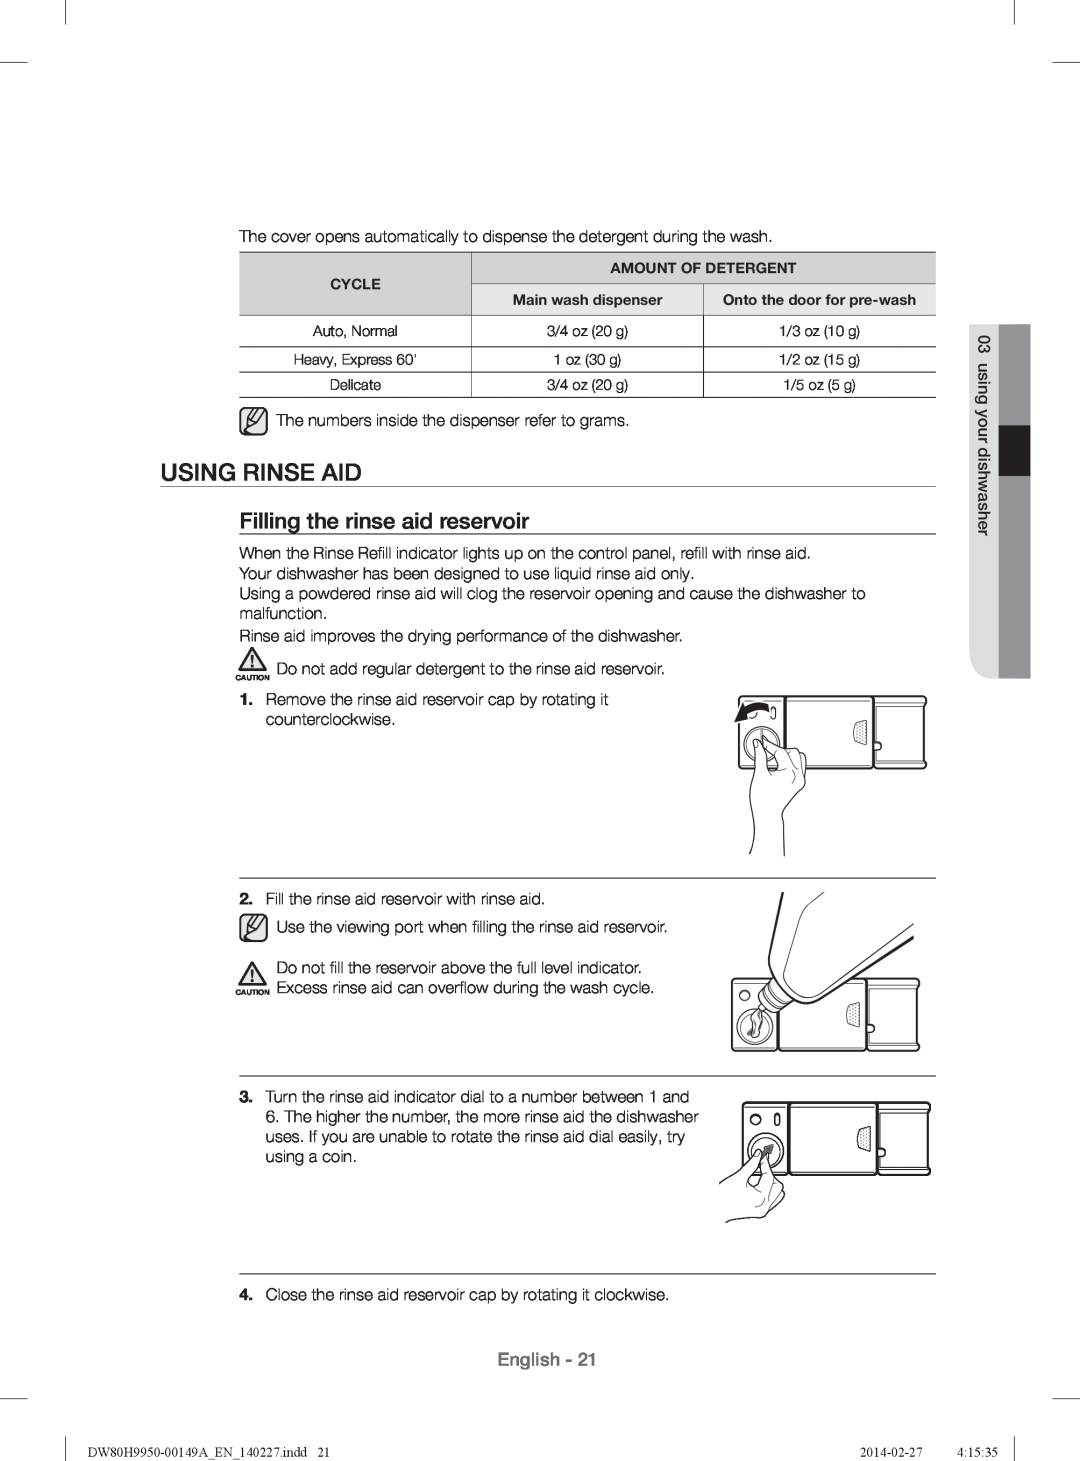 Samsung DW80H9930US user manual Using Rinse Aid, Filling the rinse aid reservoir, English 